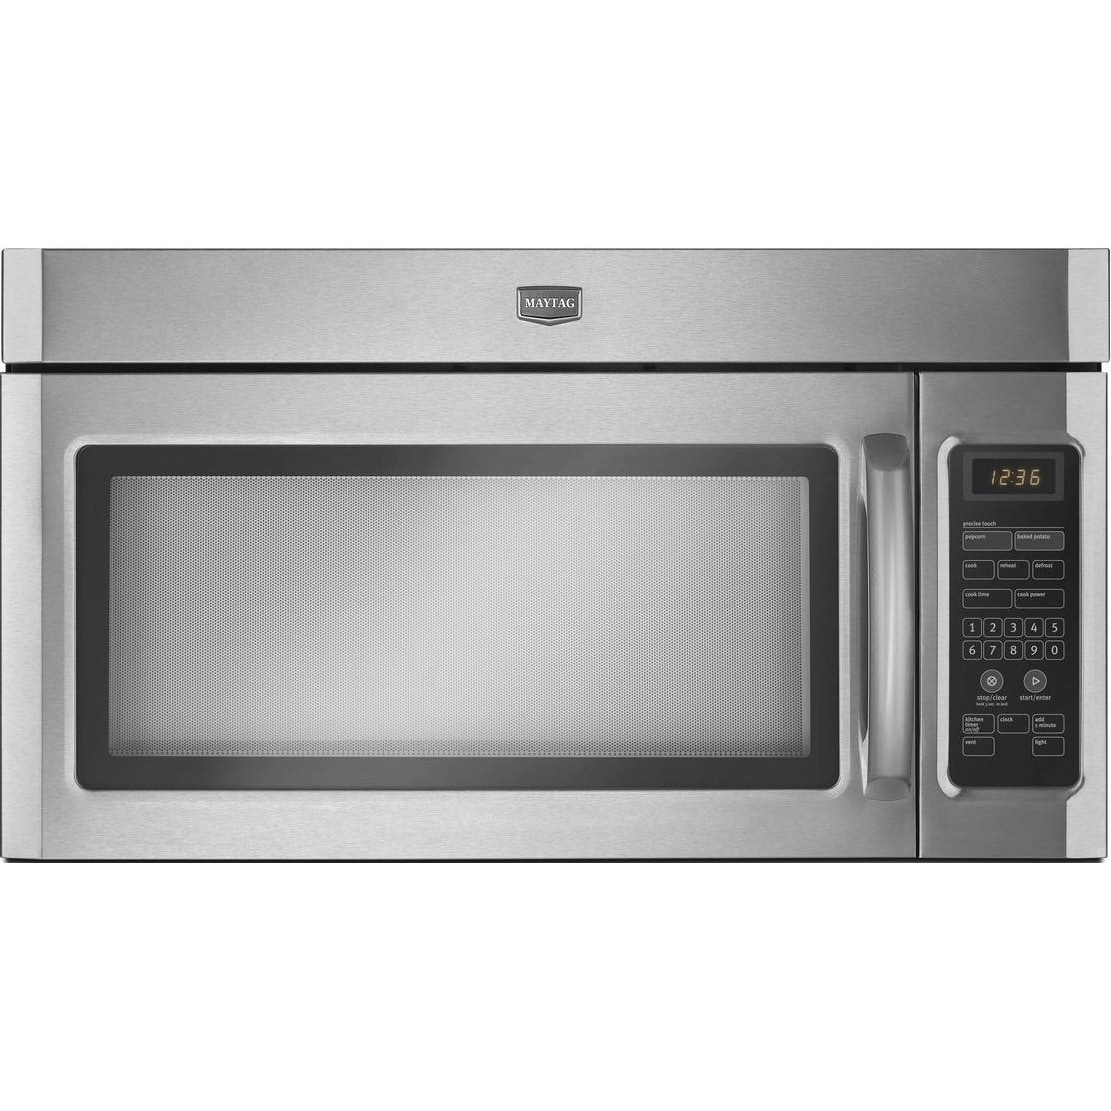 Maytag 1.6 Cubic Foot Stainless Steel Over the range Microwave